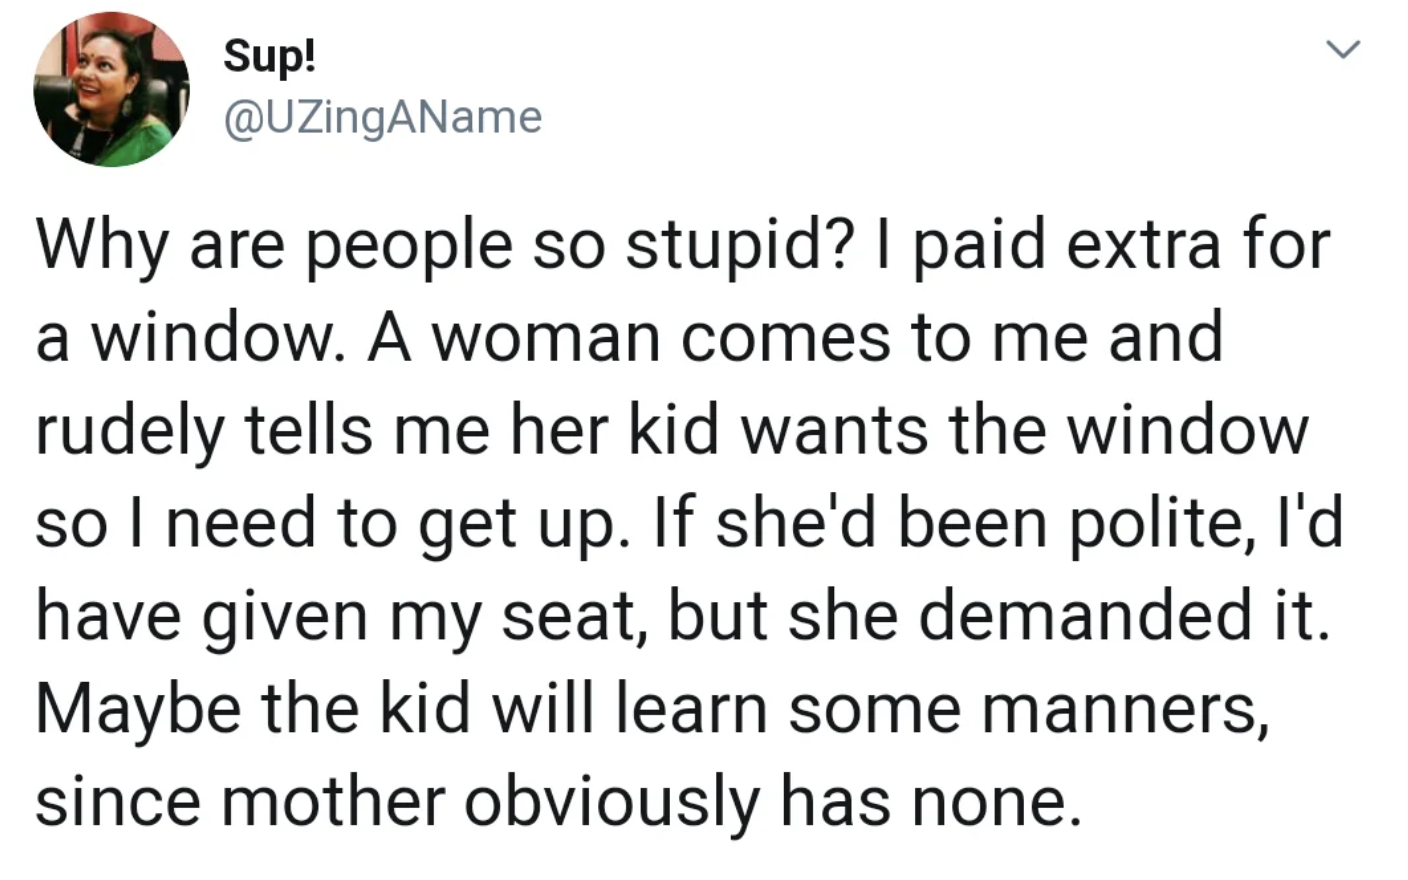 number - Sup! Why are people so stupid? I paid extra for a window. A woman comes to me and rudely tells me her kid wants the window so I need to get up. If she'd been polite, I'd have given my seat, but she demanded it. Maybe the kid will learn some manne